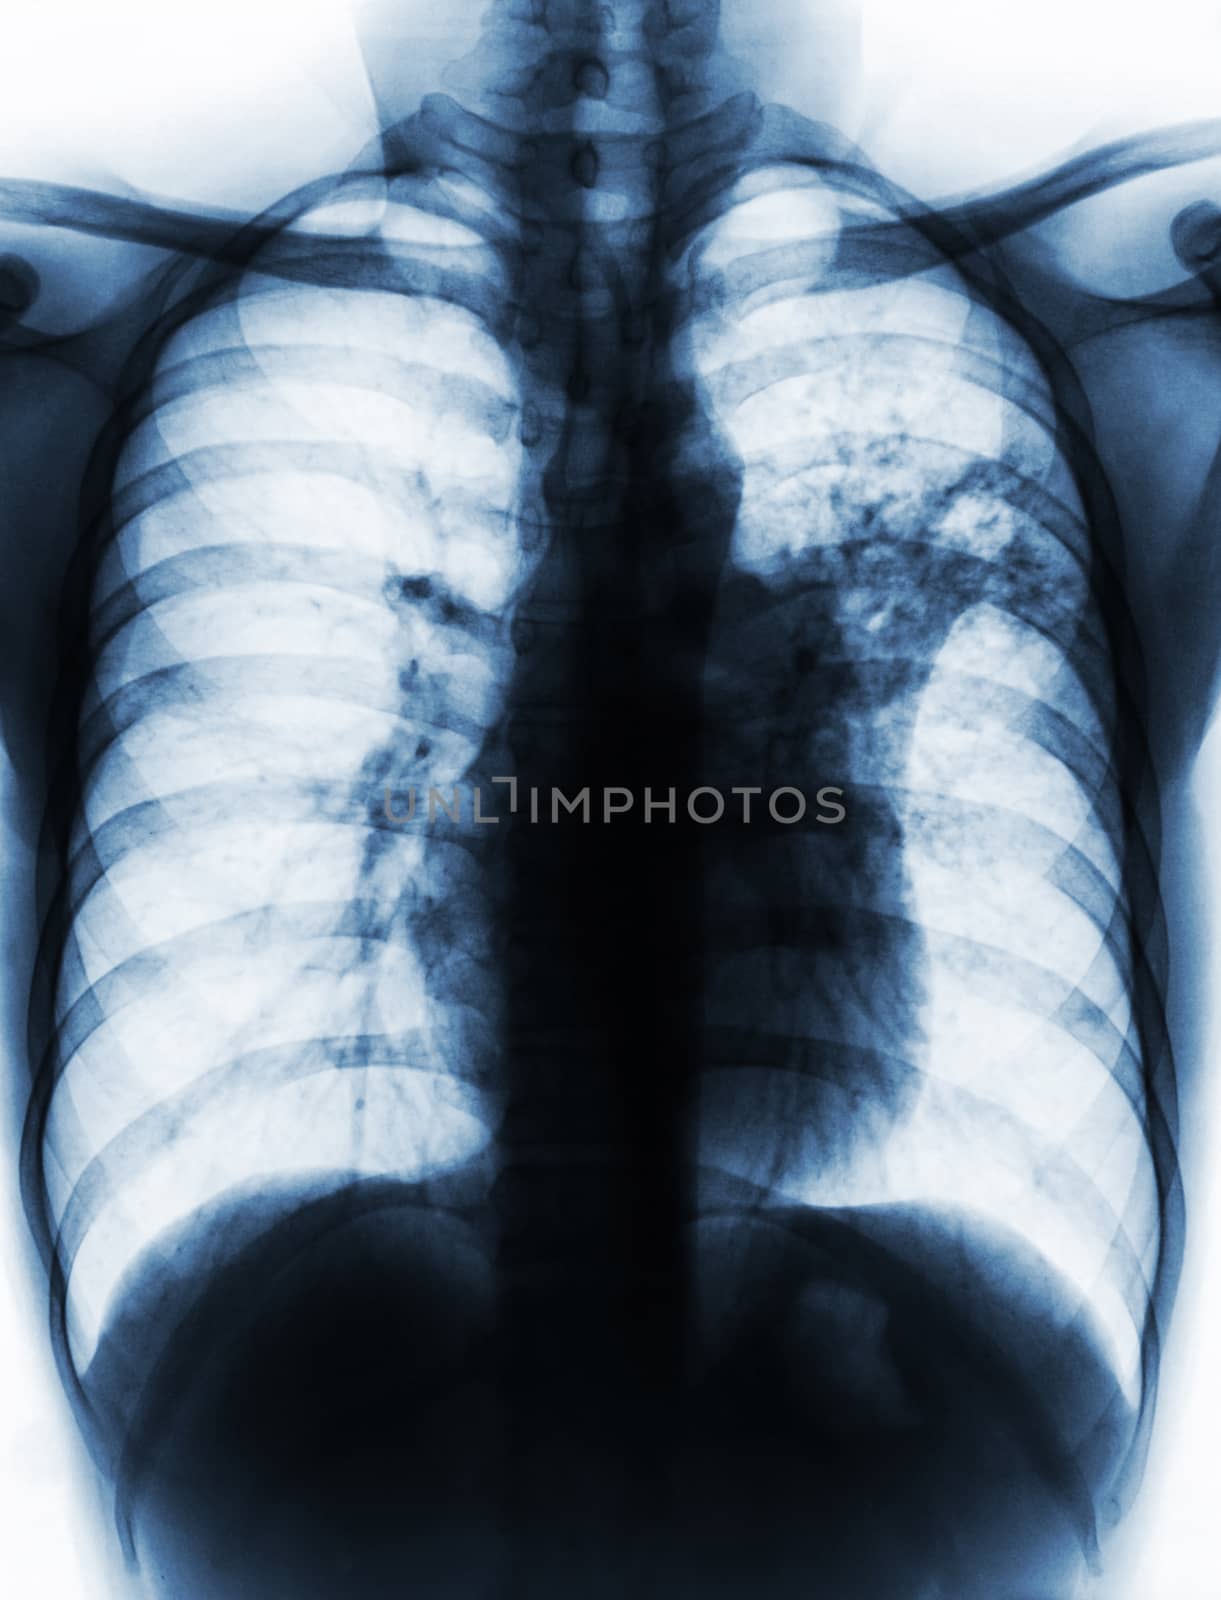 Pulmonary Tuberculosis . Film chest x-ray show alveolar infiltrate at left middle lung due to Mycobacterium tuberculosis infection . by stockdevil